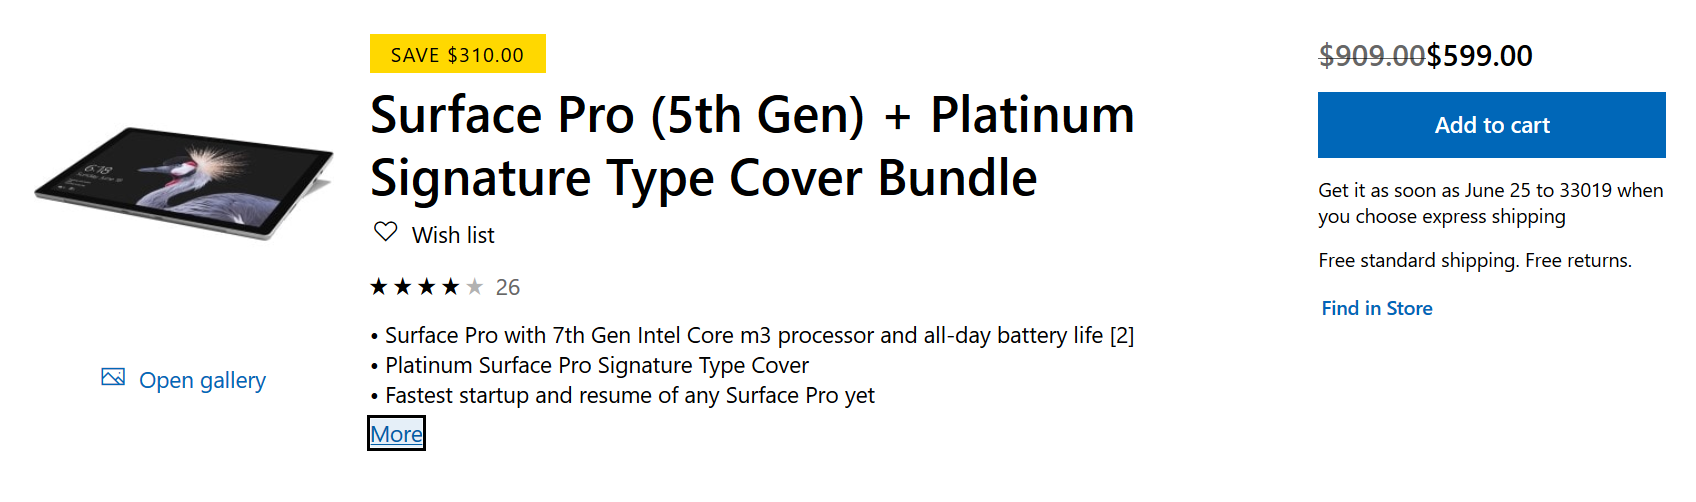 Save over $300 on a Surface Pro 5 bundle - Save $310 on a Surface Pro 5 bundle that includes a Signature Type Cover